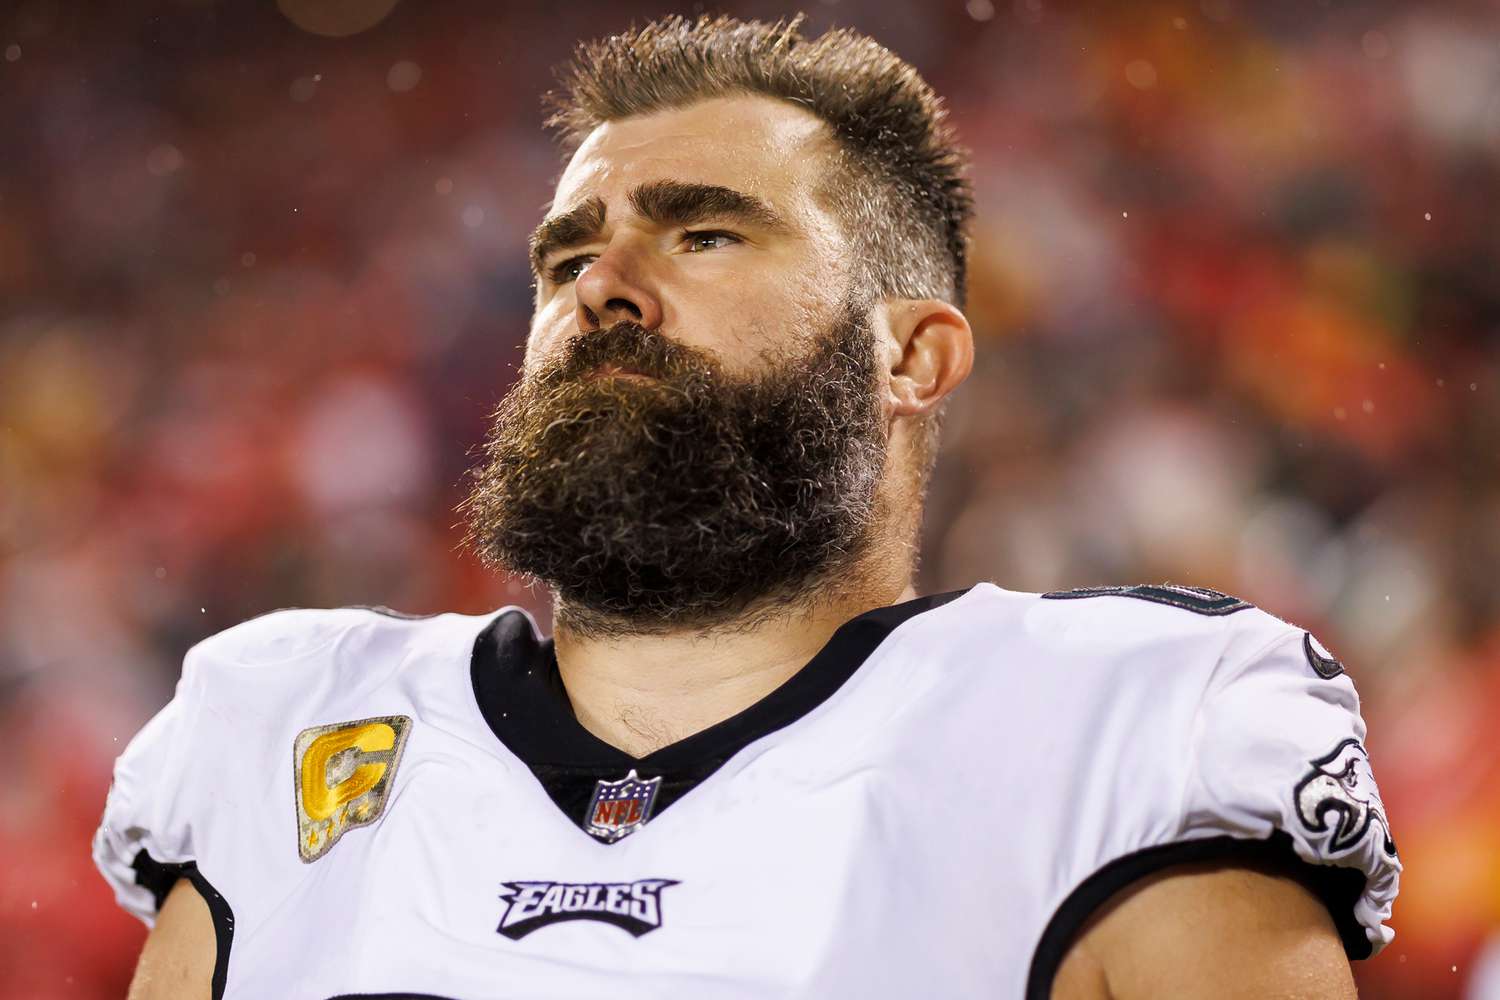 Jason Kelce Calls Out Claims His Super Bowl Ring Was ‘Stolen’: ‘This Is Incorrect’